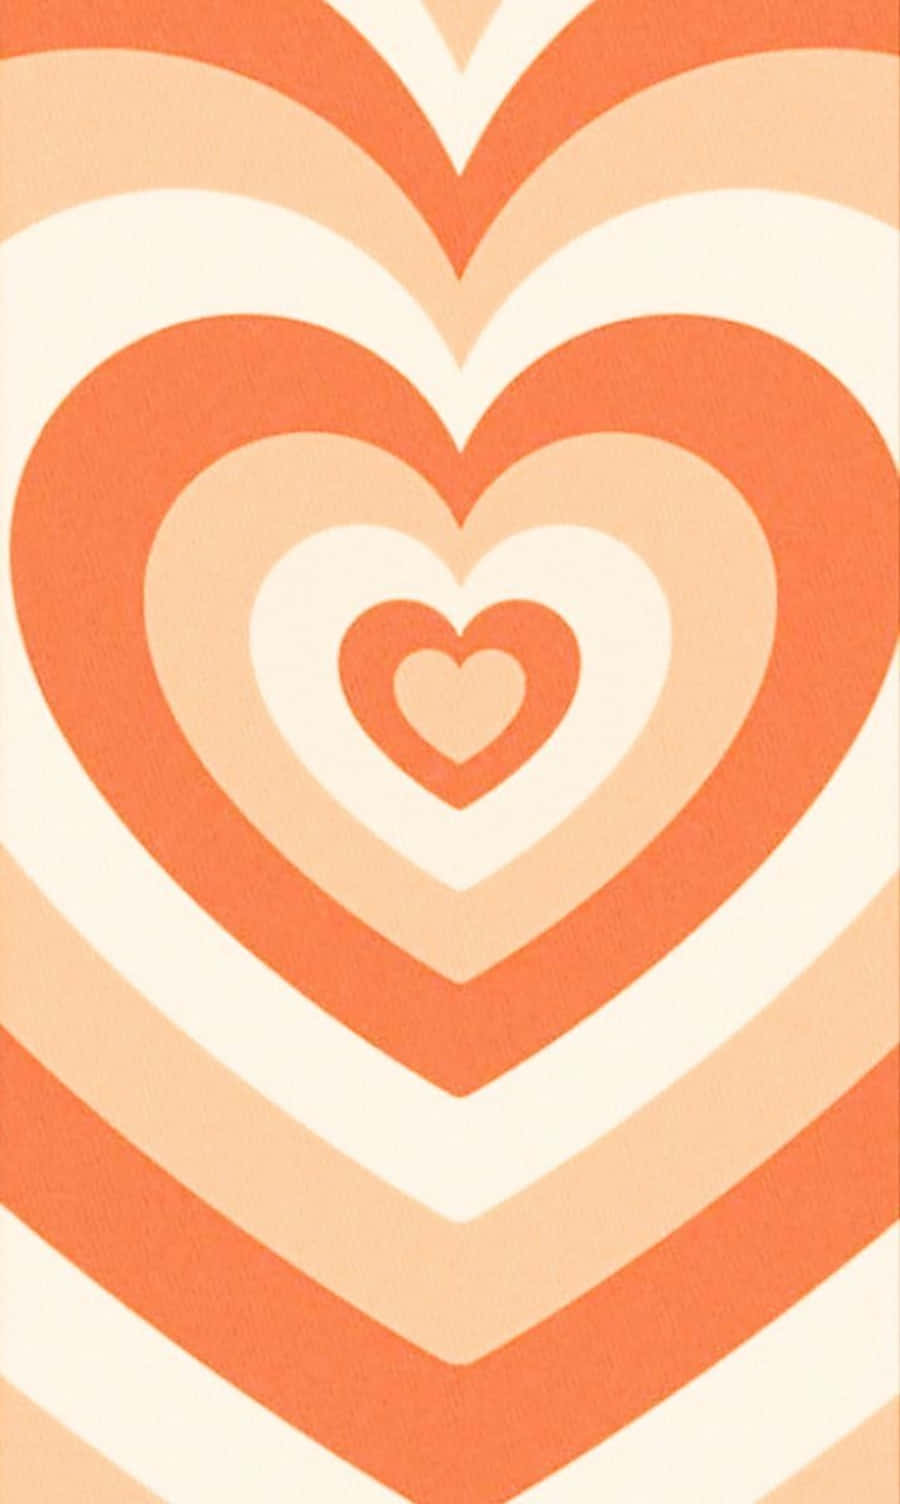 Vibrant Orange Heart with Abstract Patterns Wallpaper